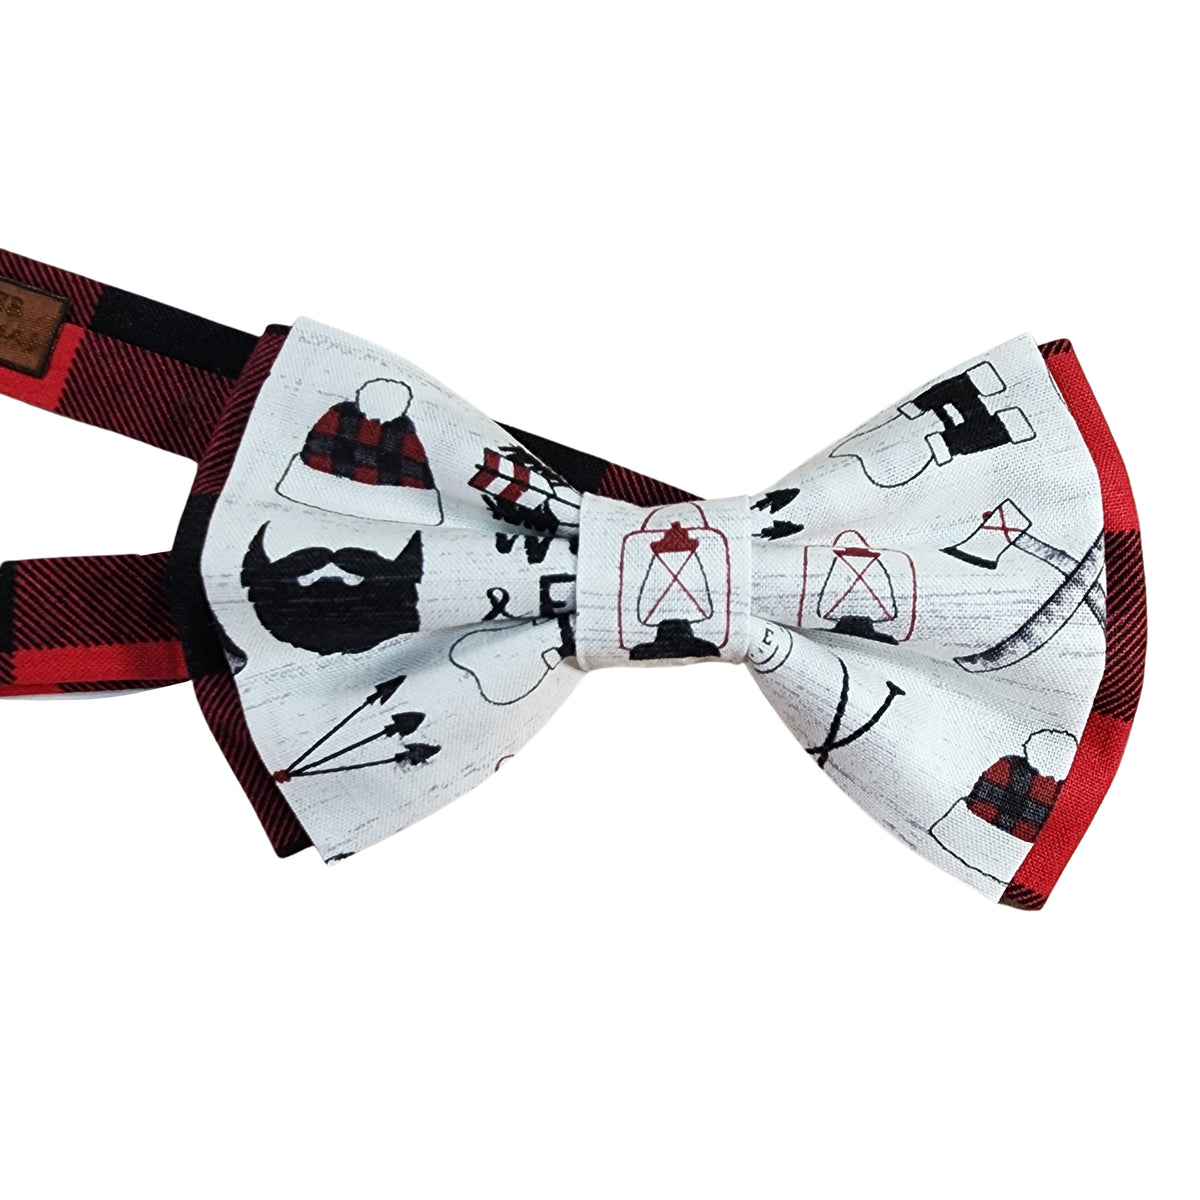 Dapper Xpressions Kansas City Chiefs Suspenders Suspenders + Clip on Bow Tie / Regular (Height 5'0 to 5'7)